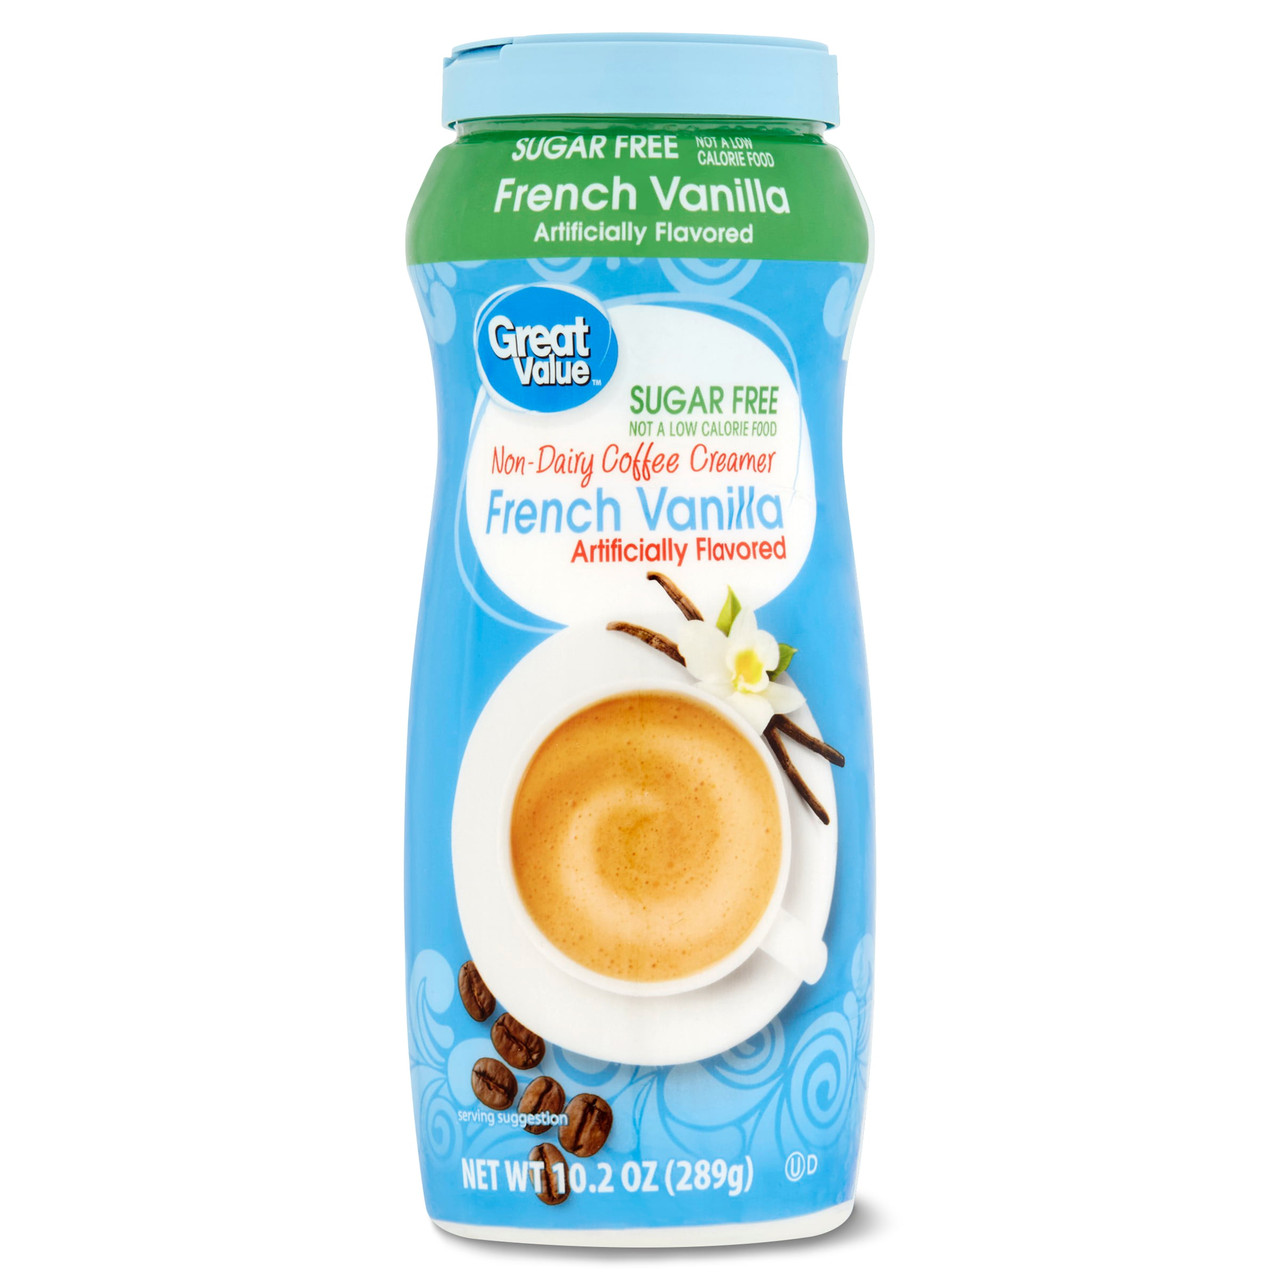 Great Value Sugar-Free French Vanilla Non-Dairy Coffee Creamer, 10.2 oz - [From 18.00 - Choose pk Qty ] - *Ships from Miami